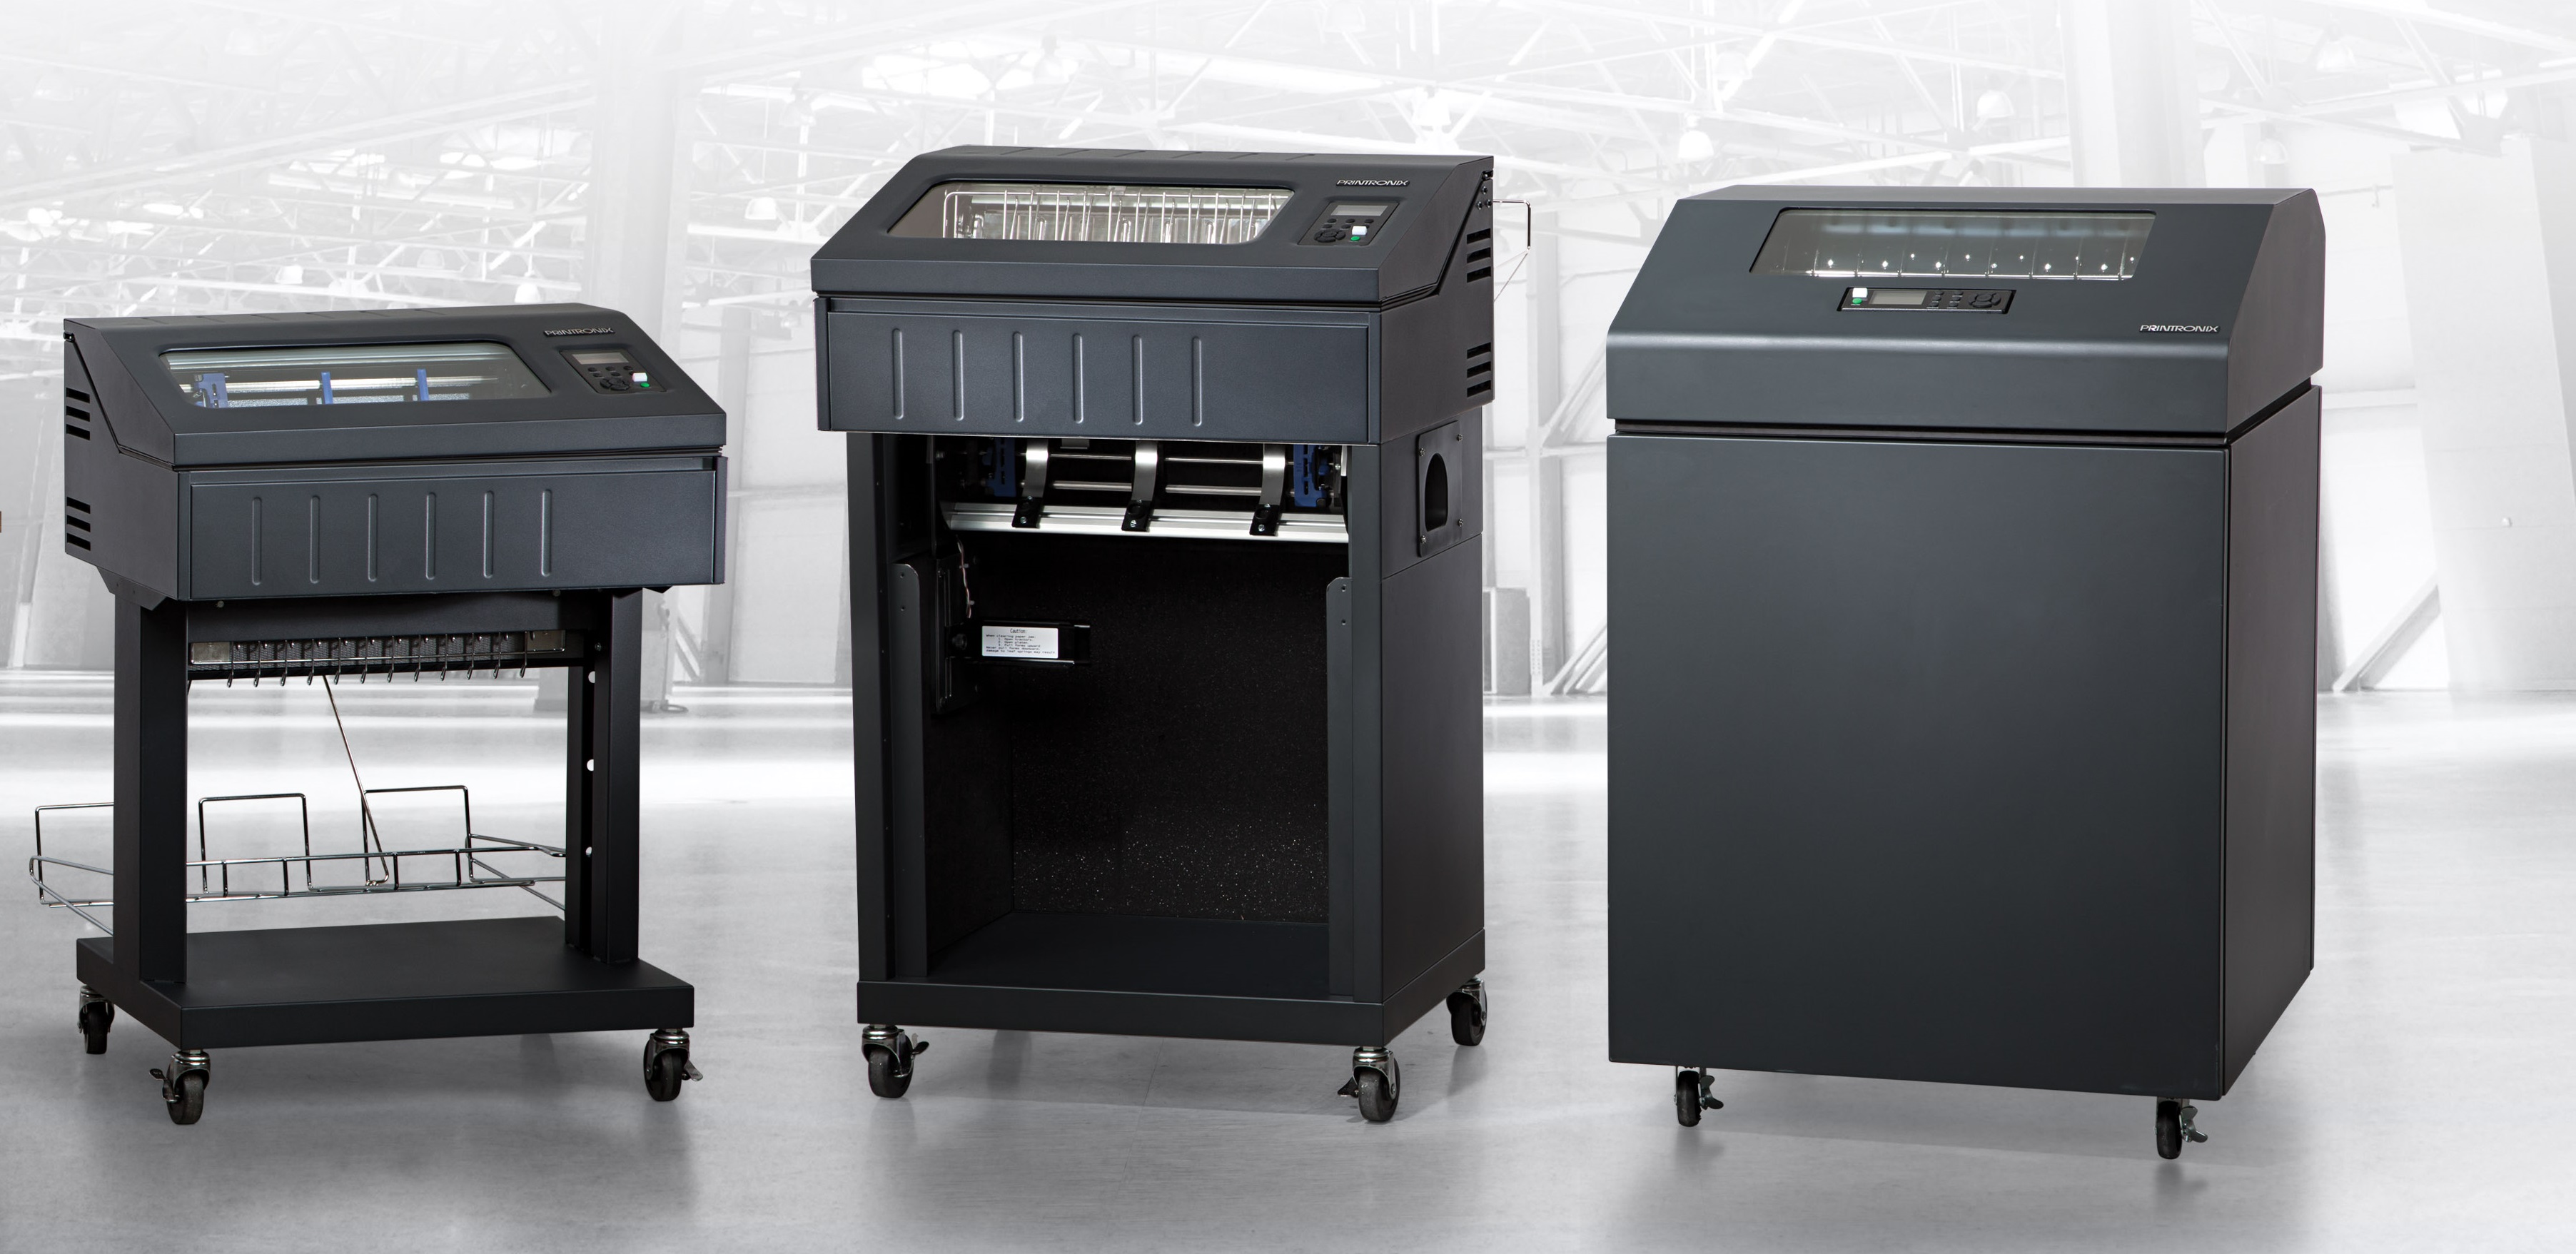 Printronix announces partnership with Tri-Continental to distribute printers in Central, East and West Africa